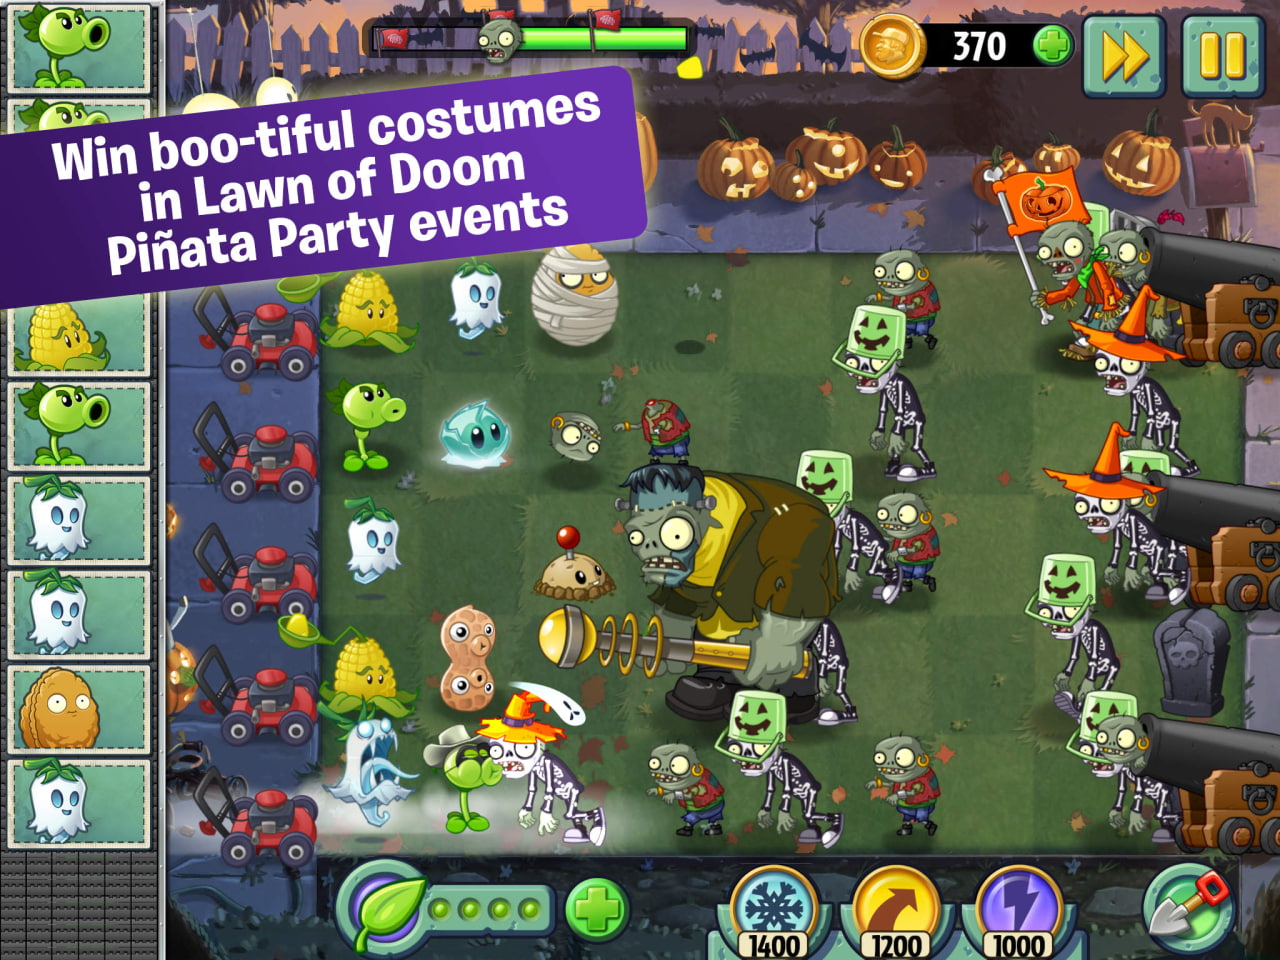 The Latest Plants vs. Zombies 2 Update Introduces Big Wave Beach Part 2